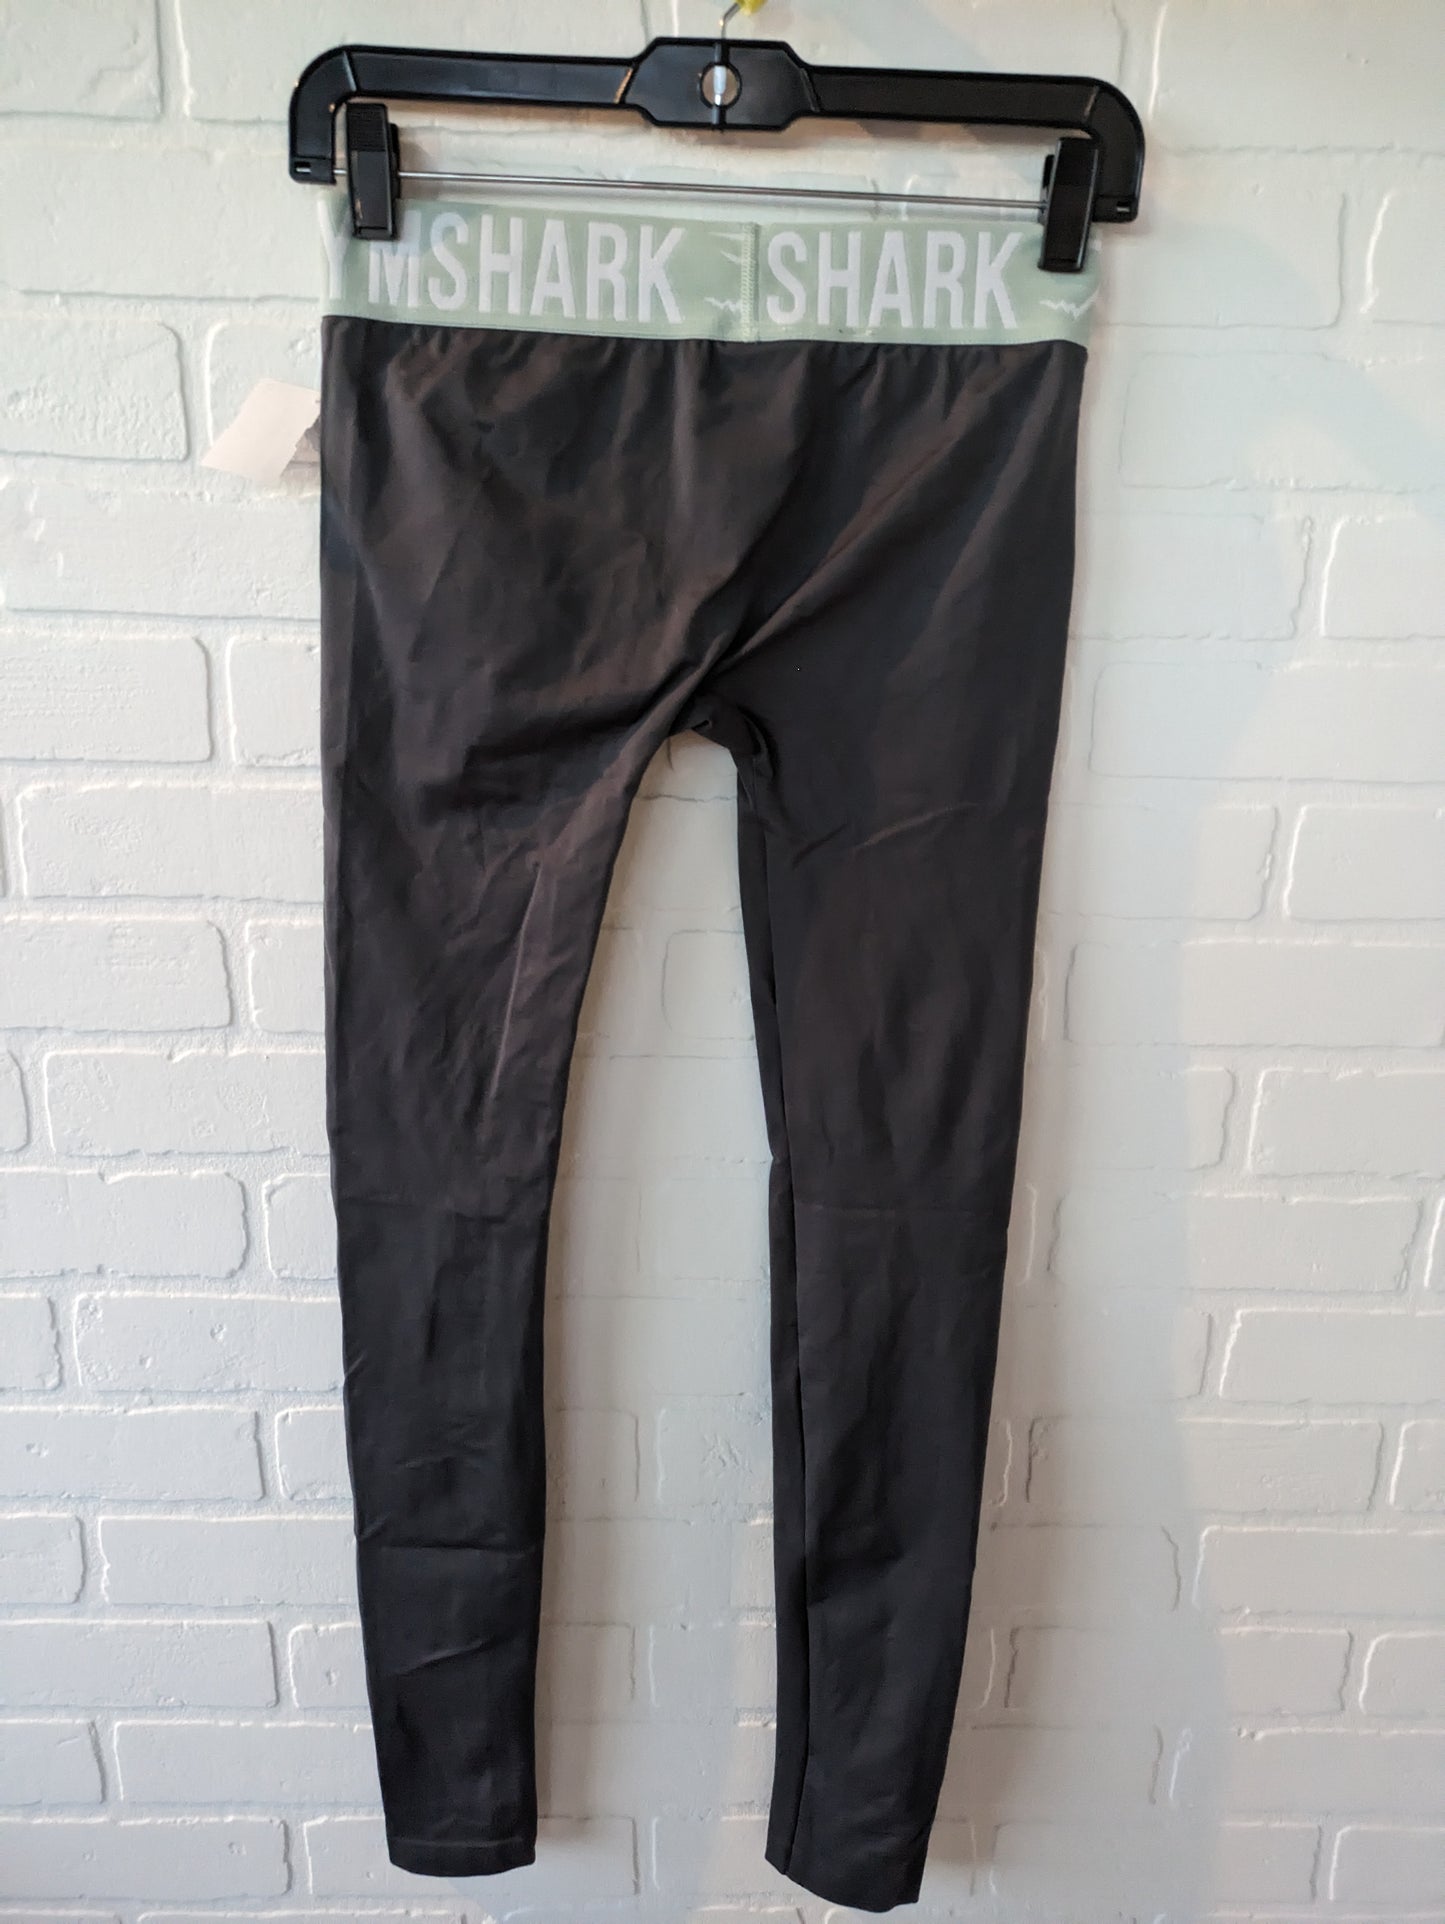 Athletic Leggings By Gym Shark  Size: 2